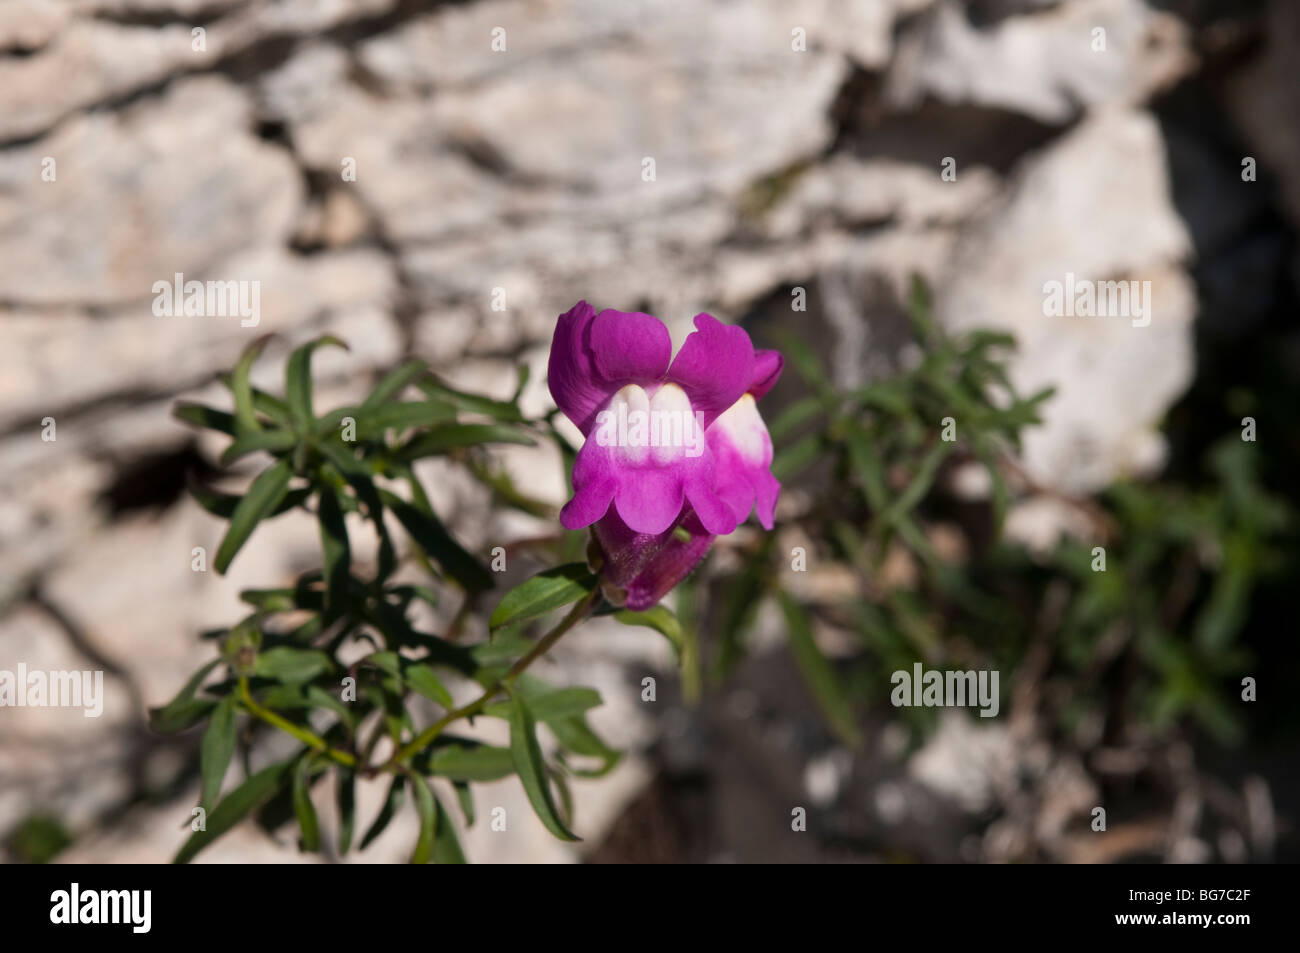 Wild flower, Herault, Southern France Stock Photo